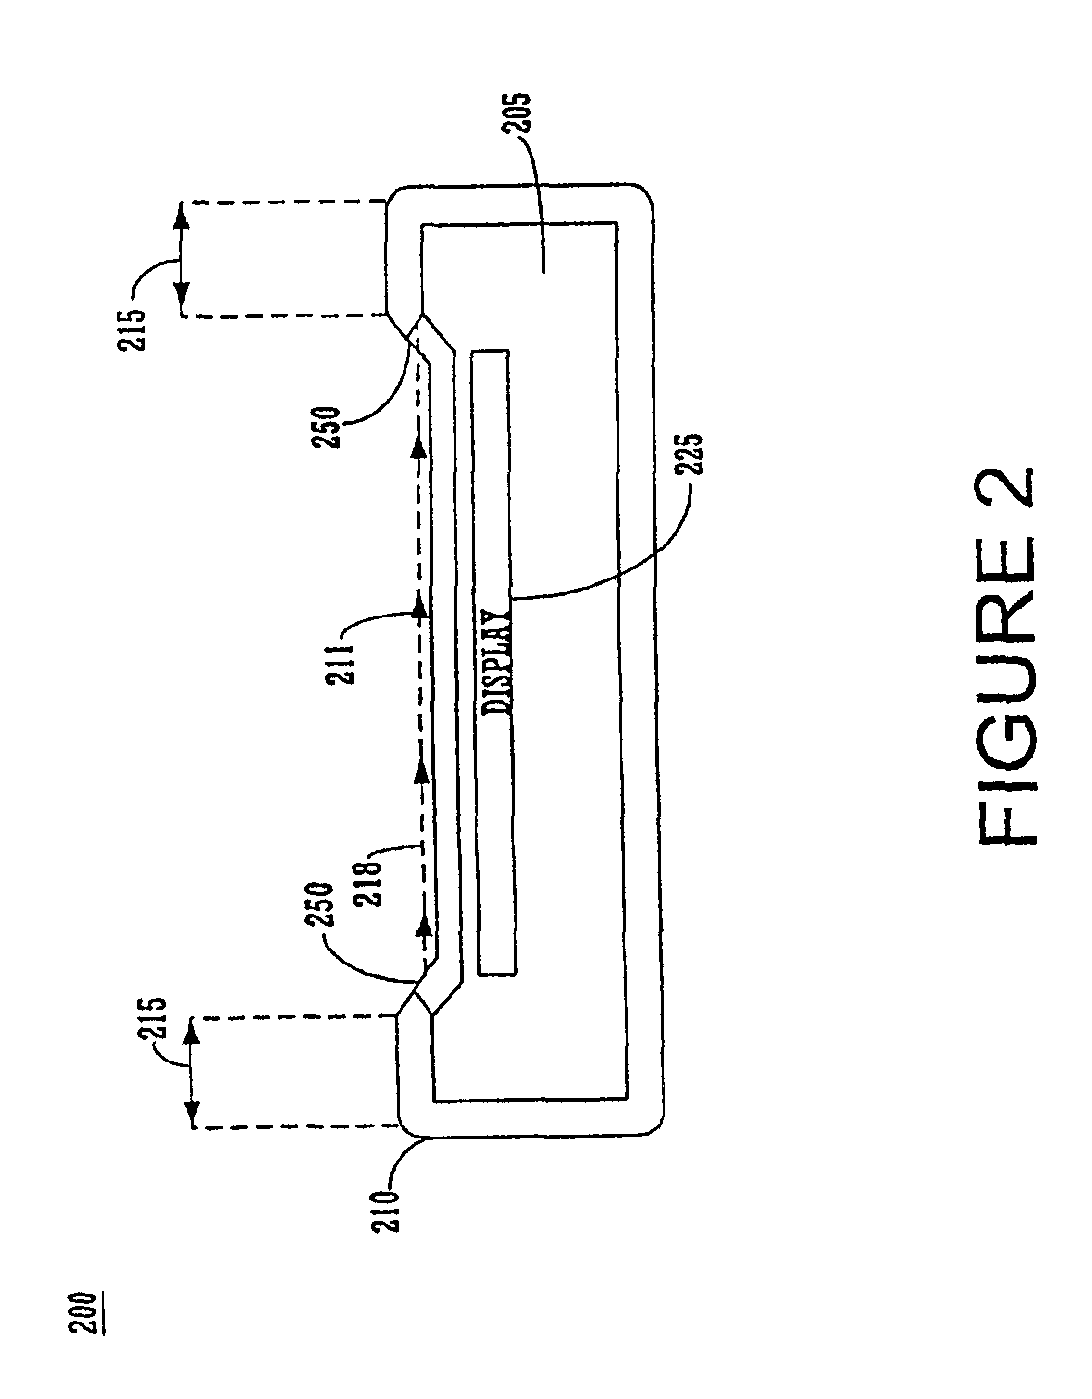 High transparency integrated enclosure touch screen assembly for a portable hand held device